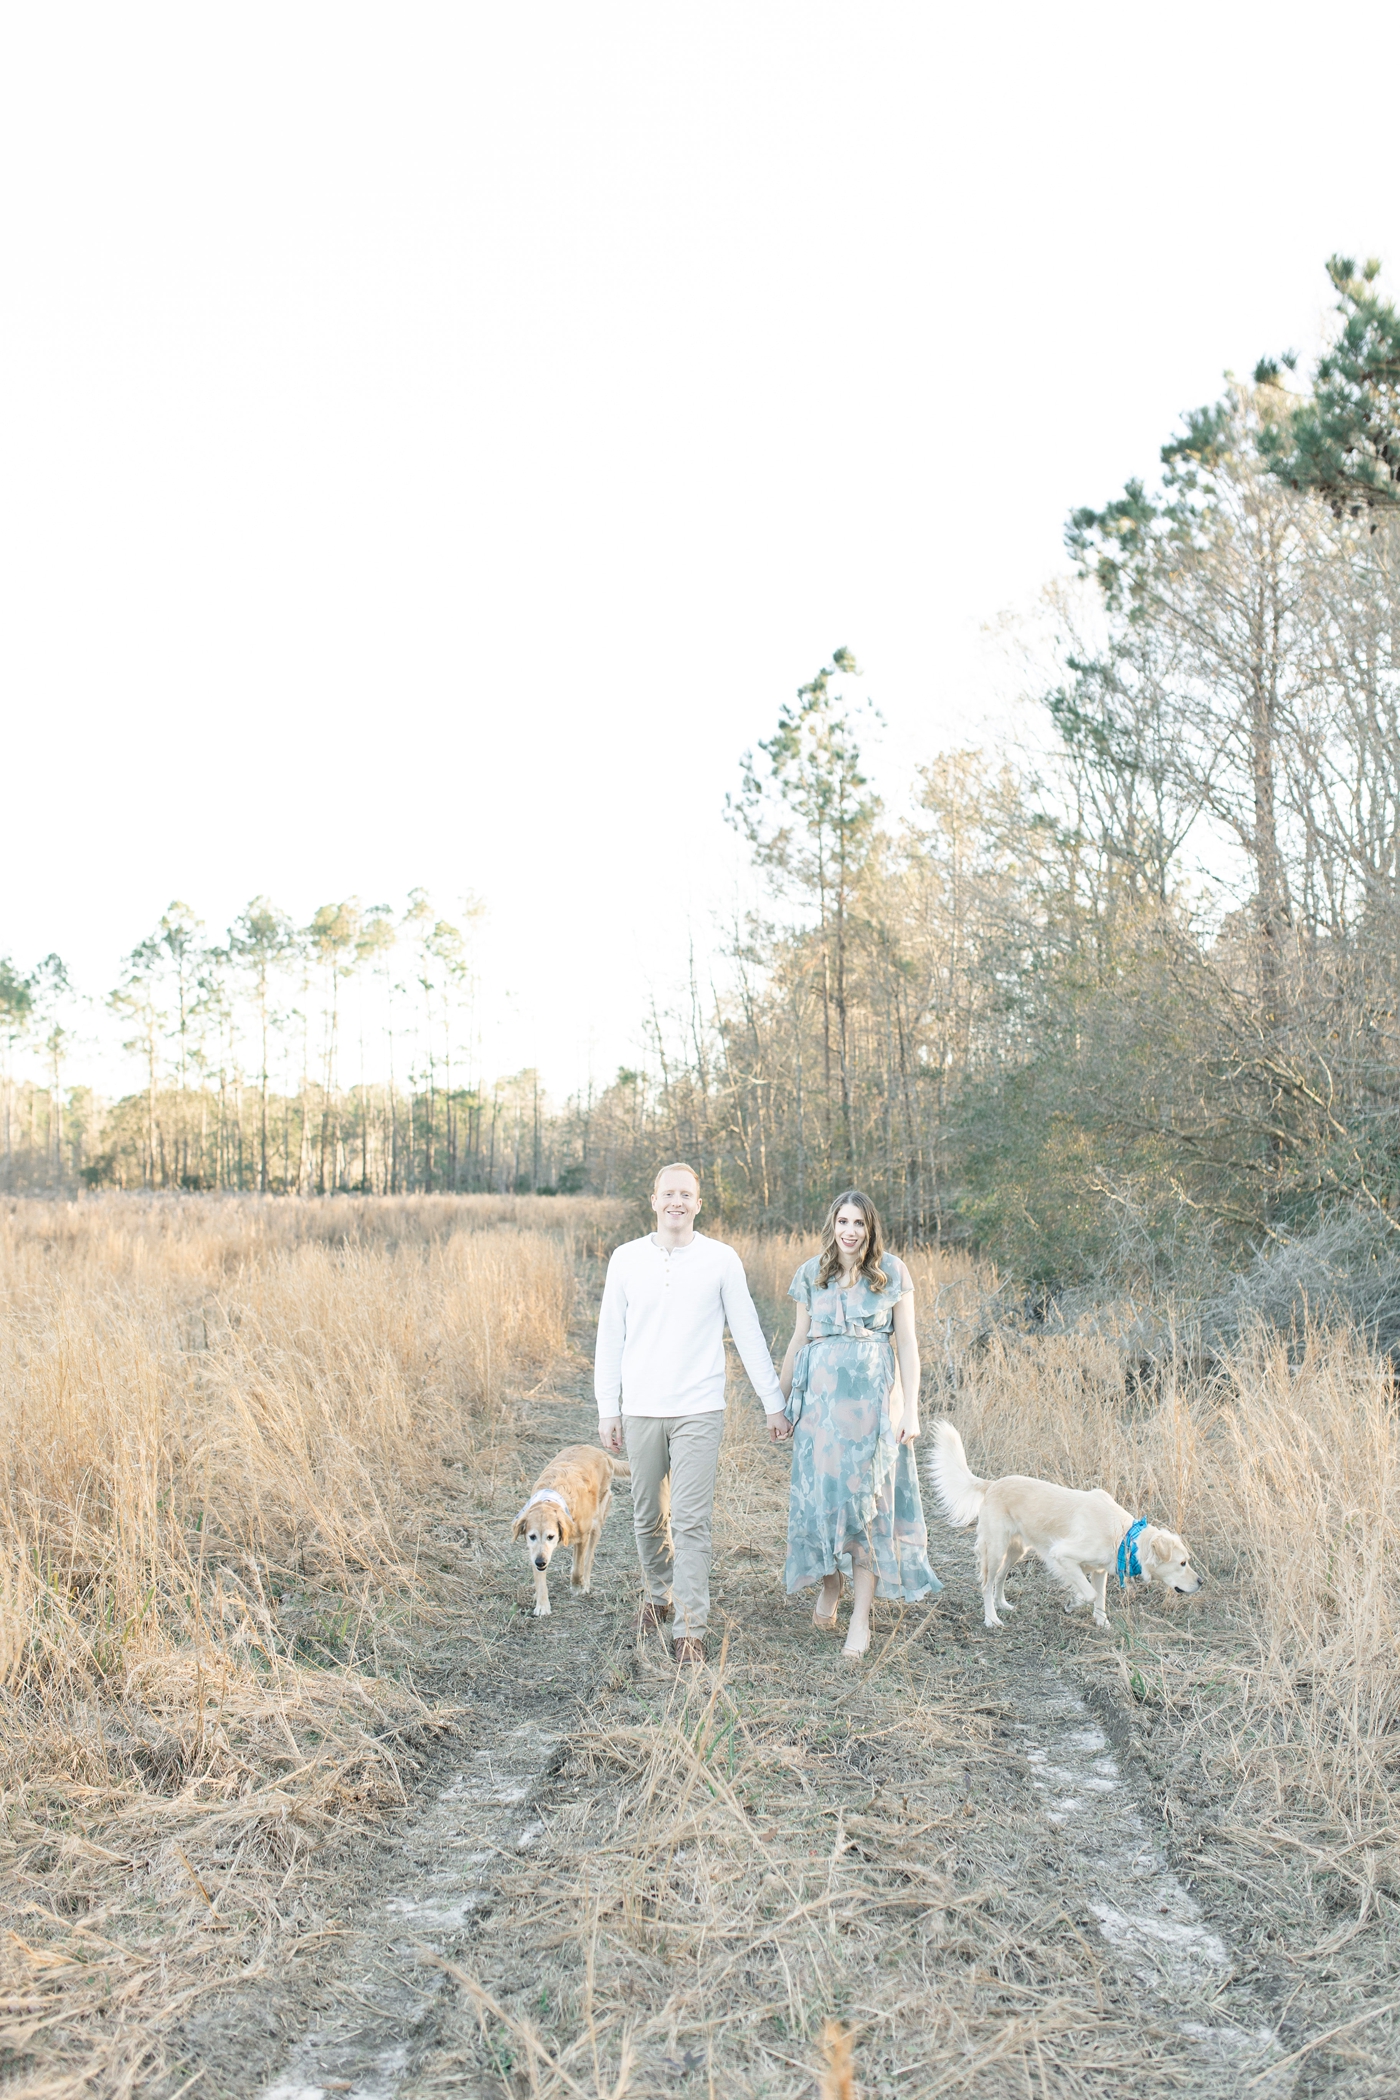 Couple walking through field with two dogs. Photo by Little Sunshine Photography.